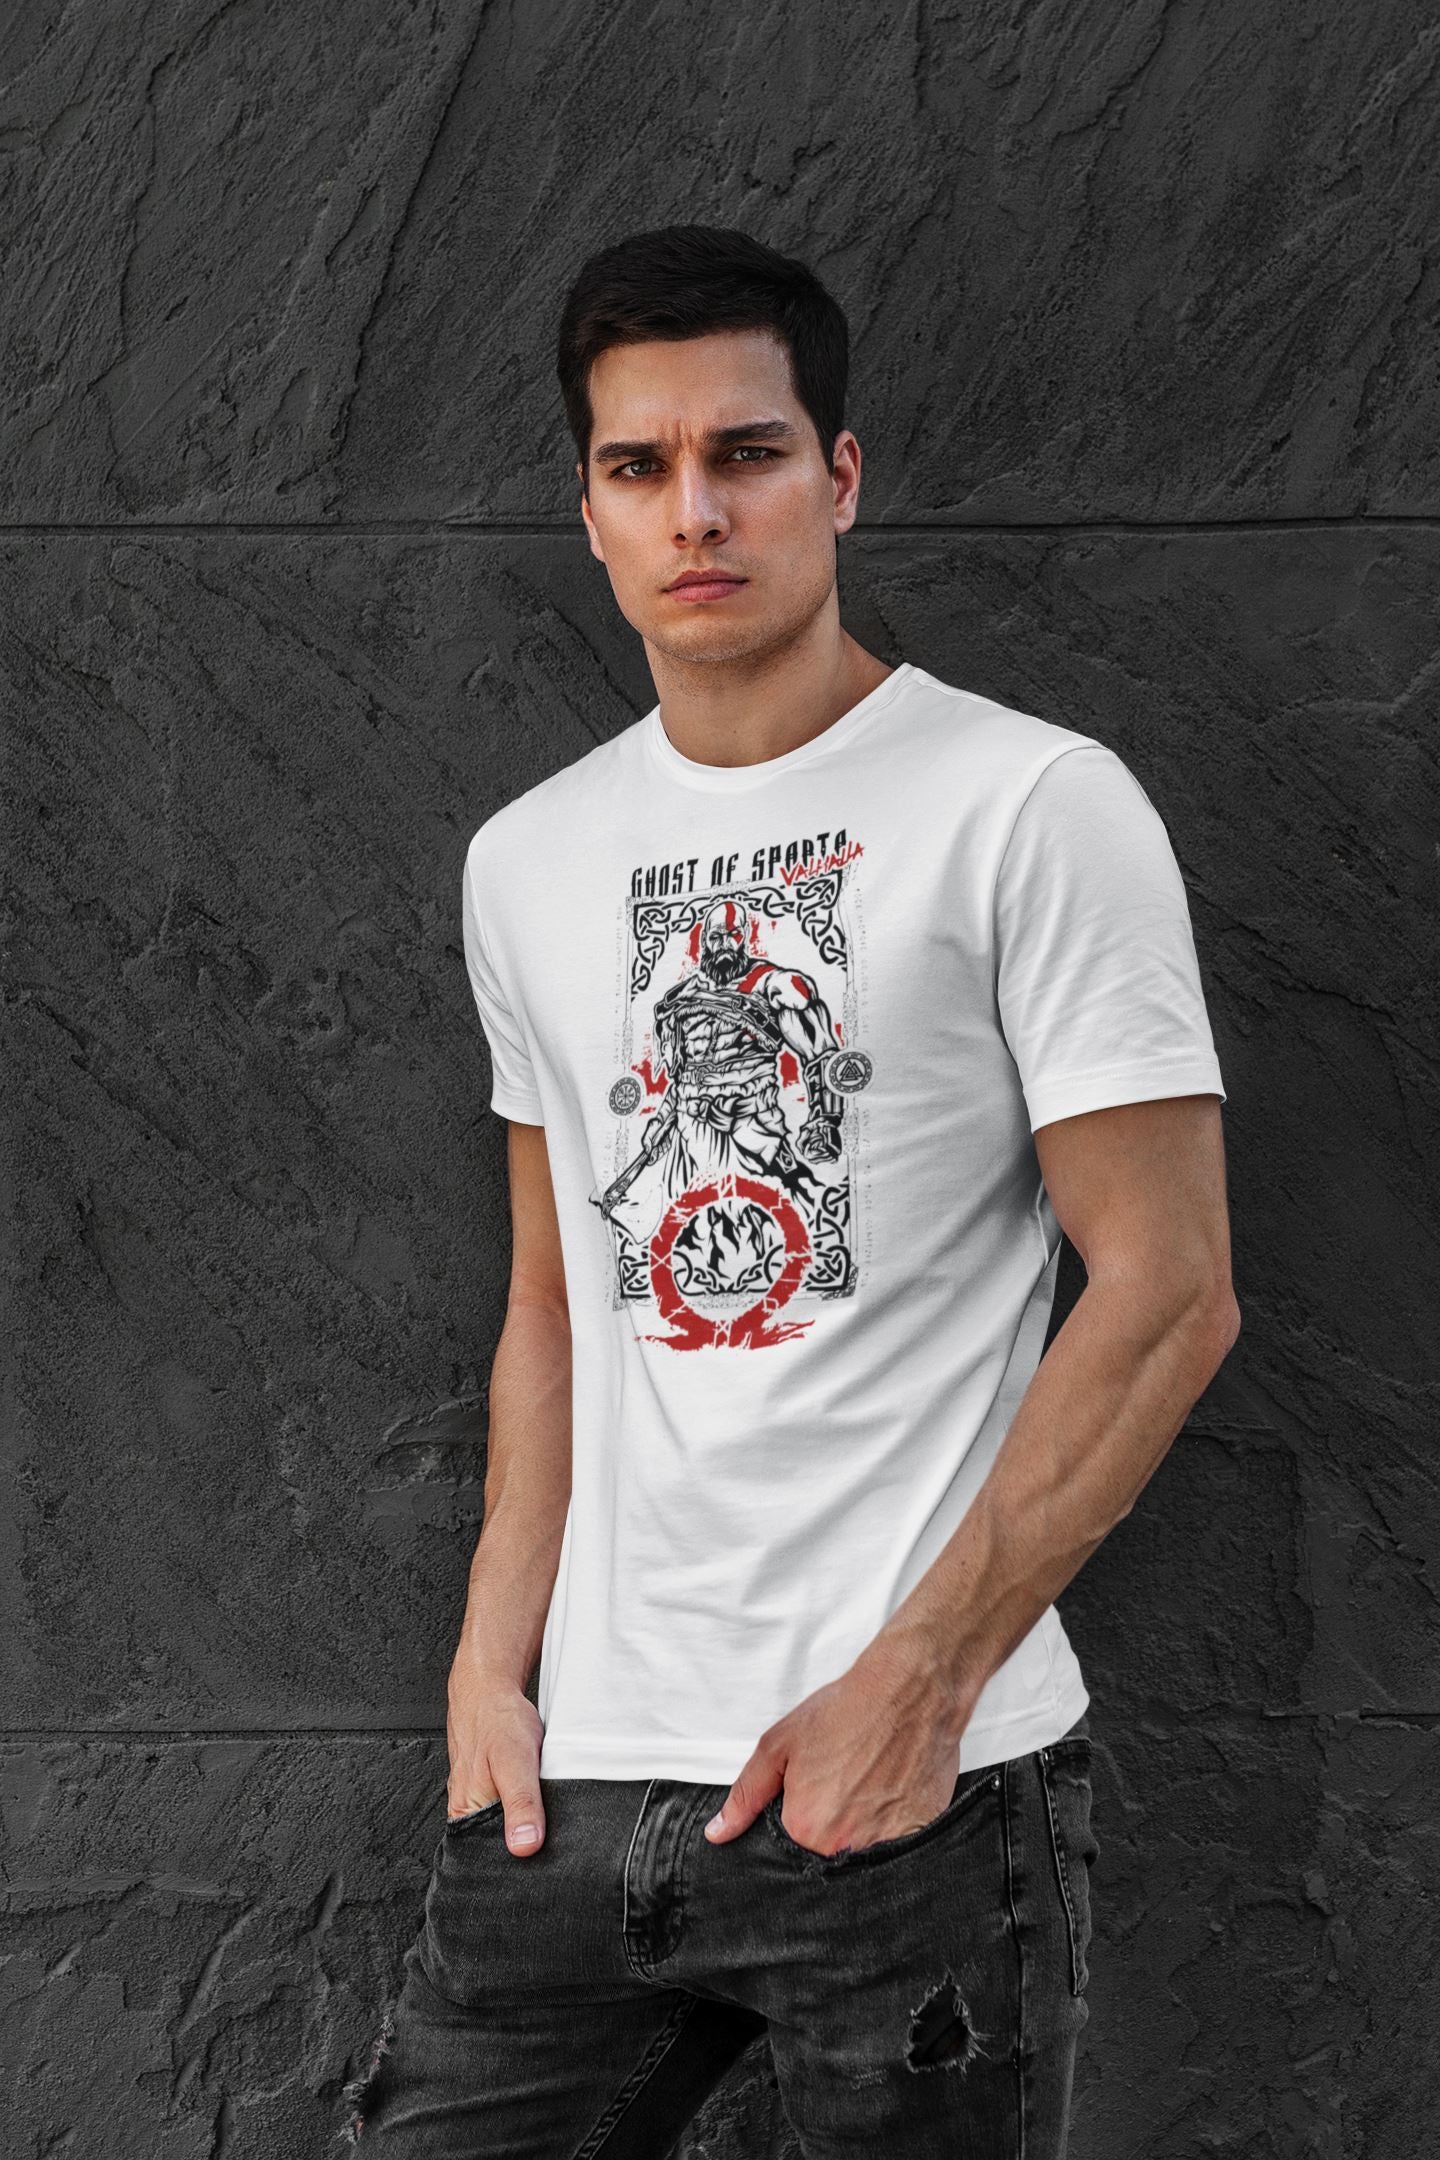 Kratos The Ghost of Sparta / Valhalla Official God of War T Shirt for Men and Women freeshipping - Catch My Drift India